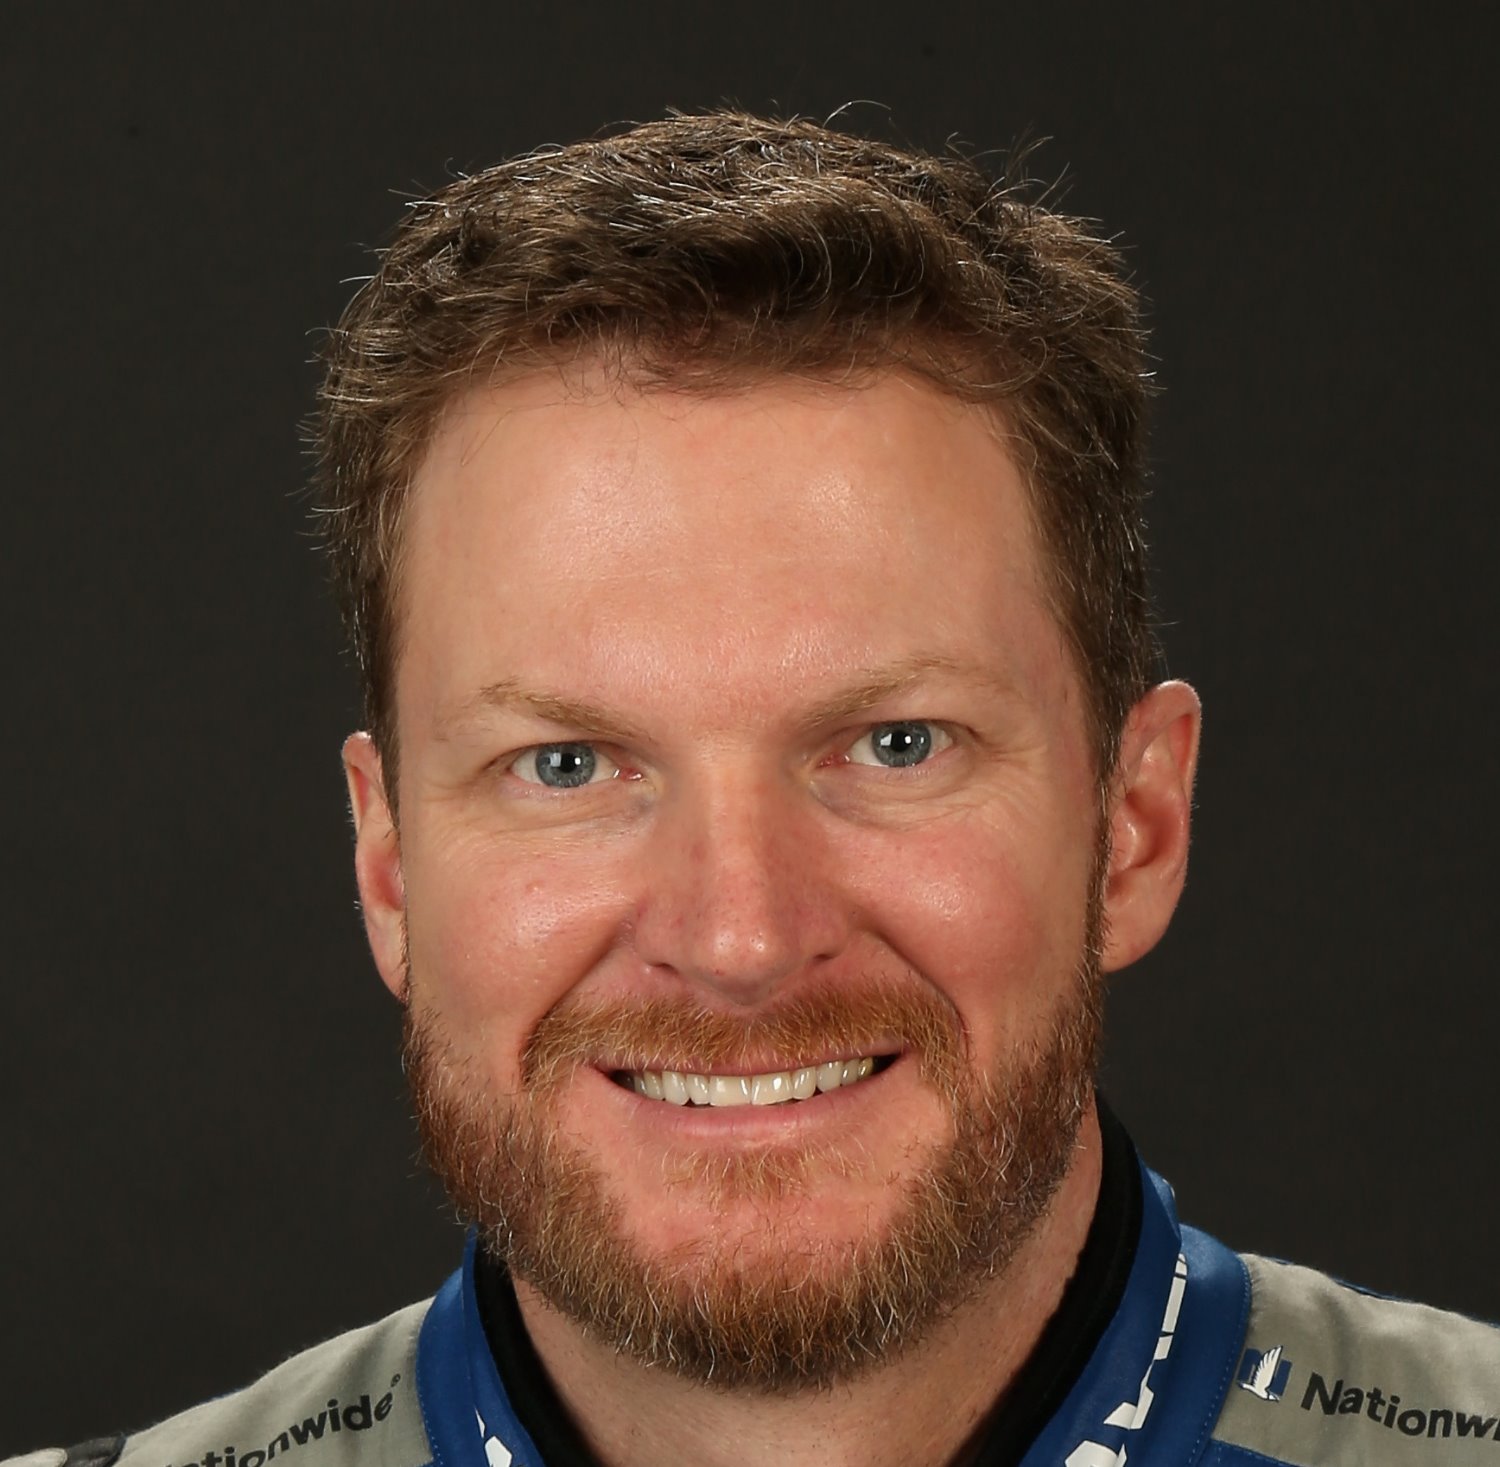 Dale Jr. Being the son of a former driver, means you are ridding on daddy's coattails. Greatness has to be proven. He lost control and crashed out.